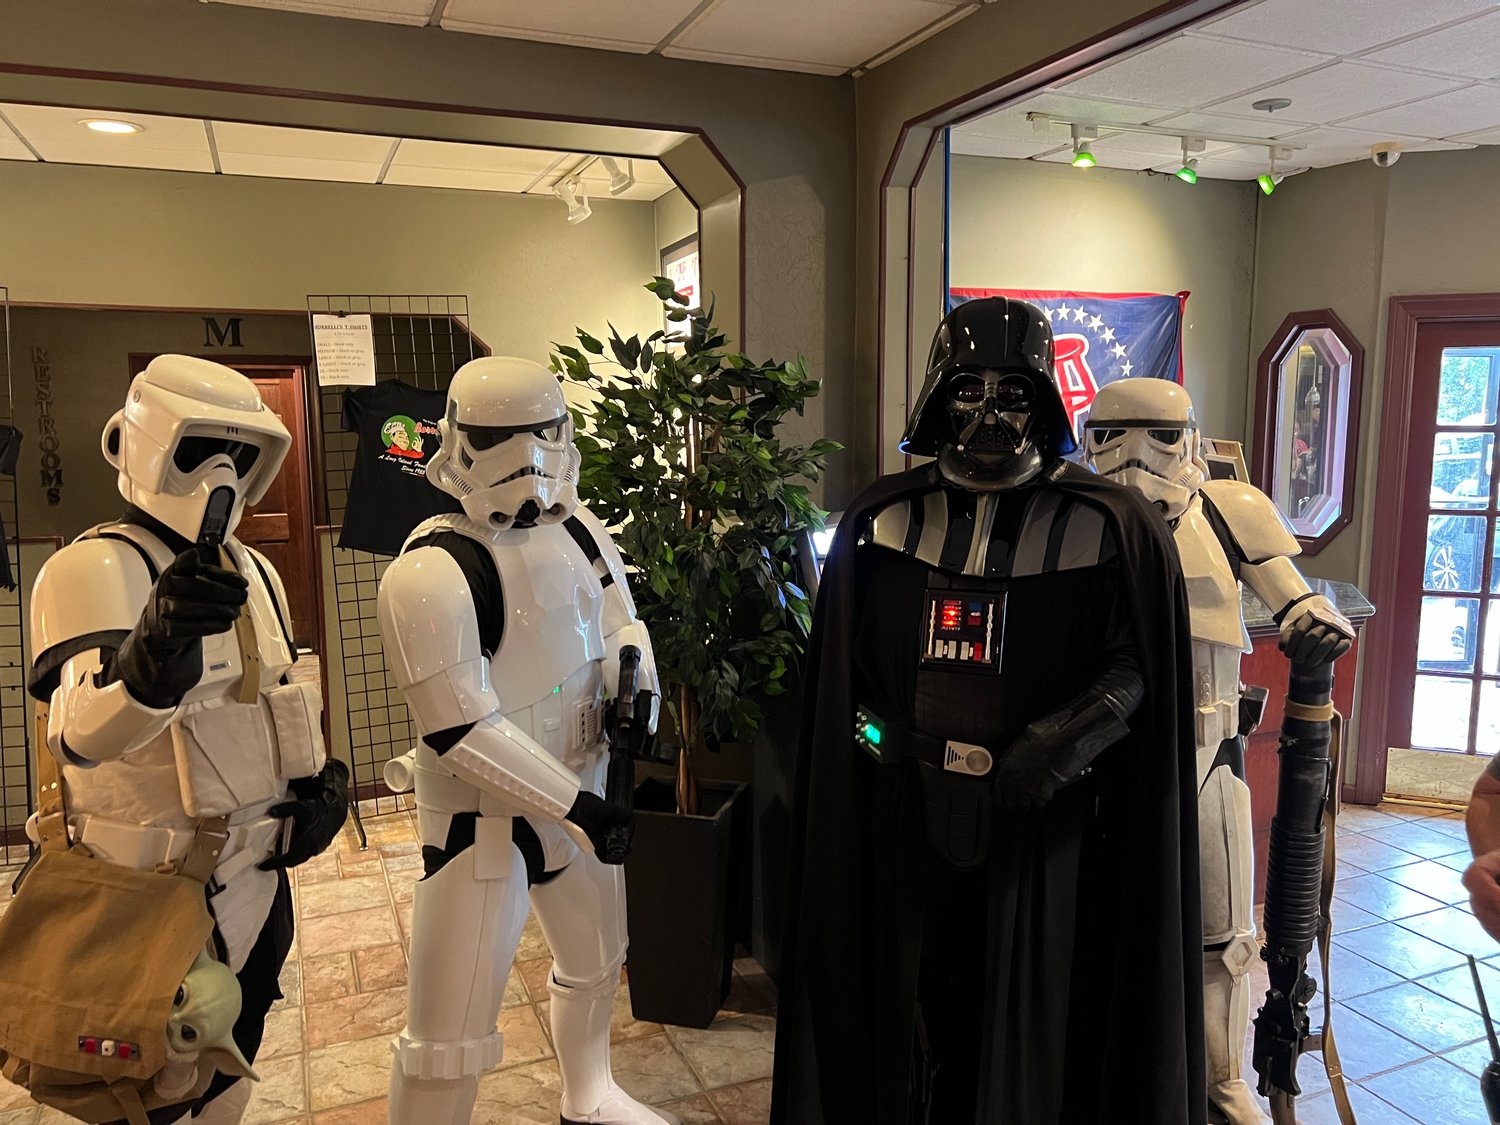 The 501st Legion, an international organization dedicated to the creation and wearing of detailed replicas of villains from the “Star Wars” universe, stopped by to have some pancakes.